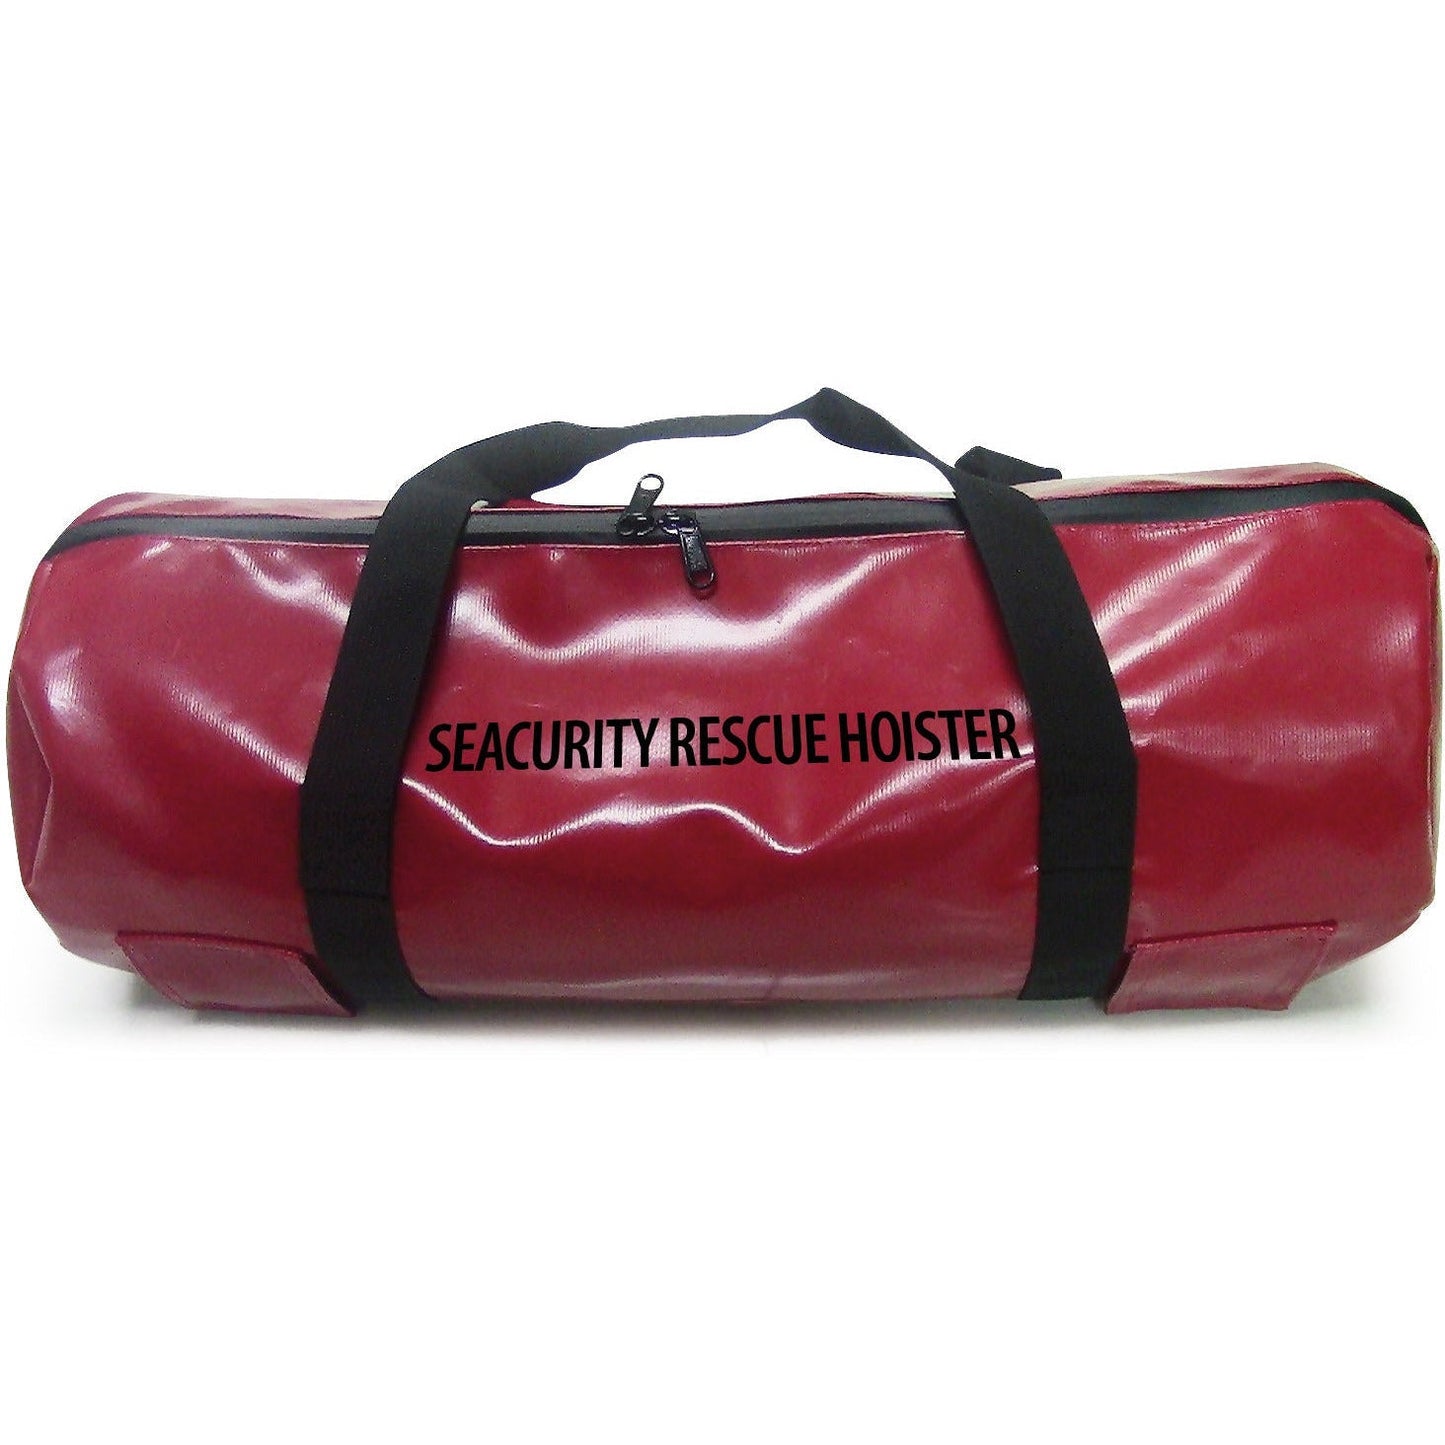 Rescue Hoister (Bergesegel) - SeaCurity - von SeaCurity GmbH